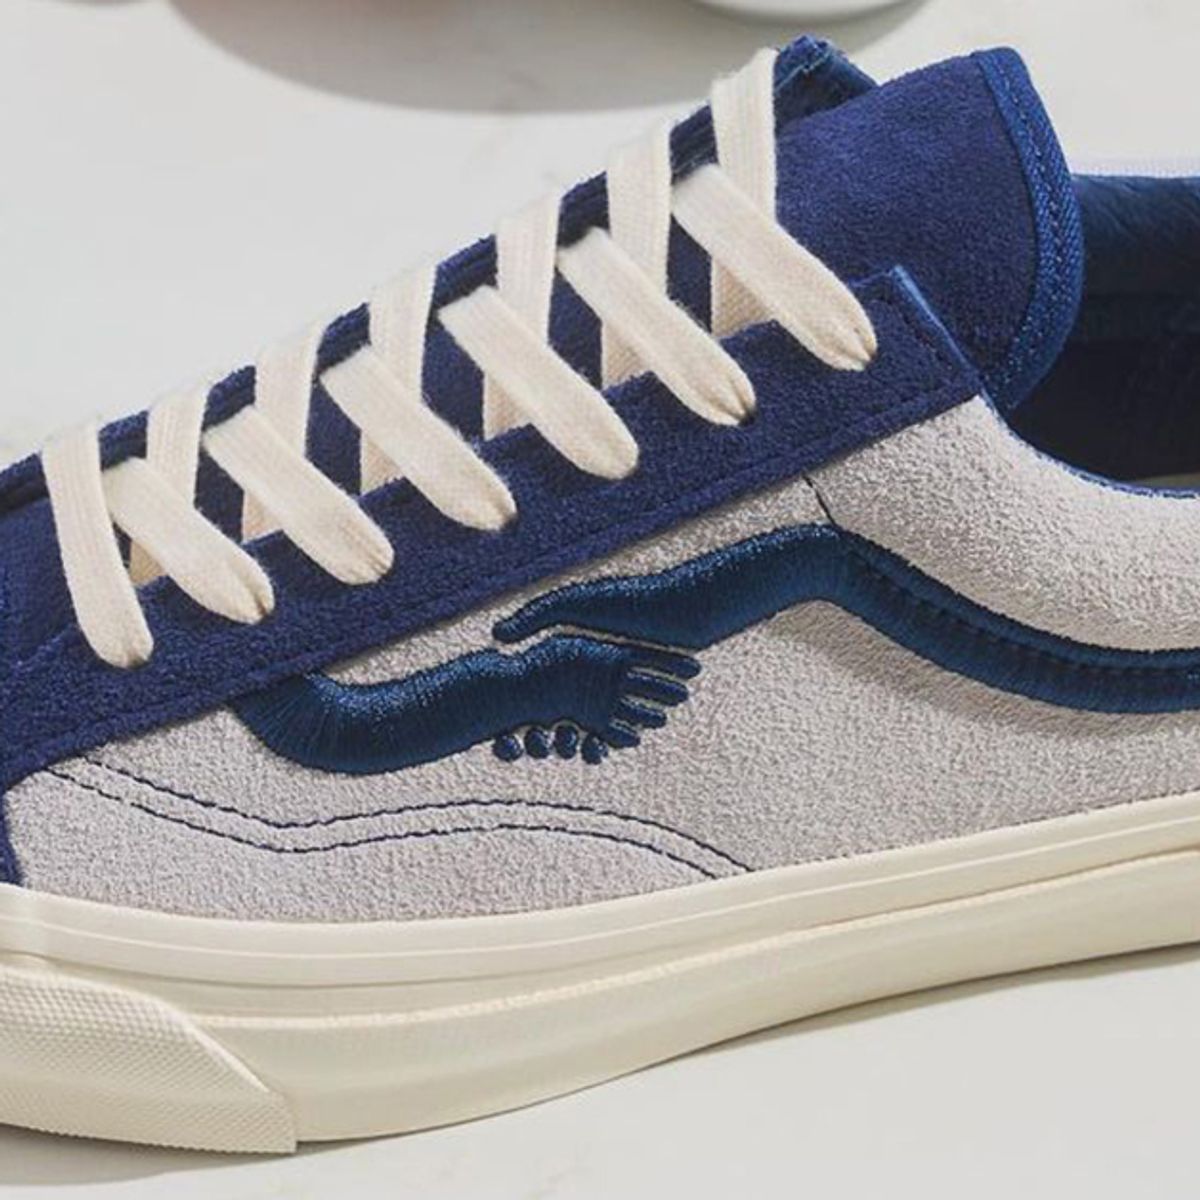 Nadenkend kloon kapperszaak Notre and Vault by Vans Brew Up Tea, Expresso and Matcha-Inspired Style 36s  - Sneaker Freaker